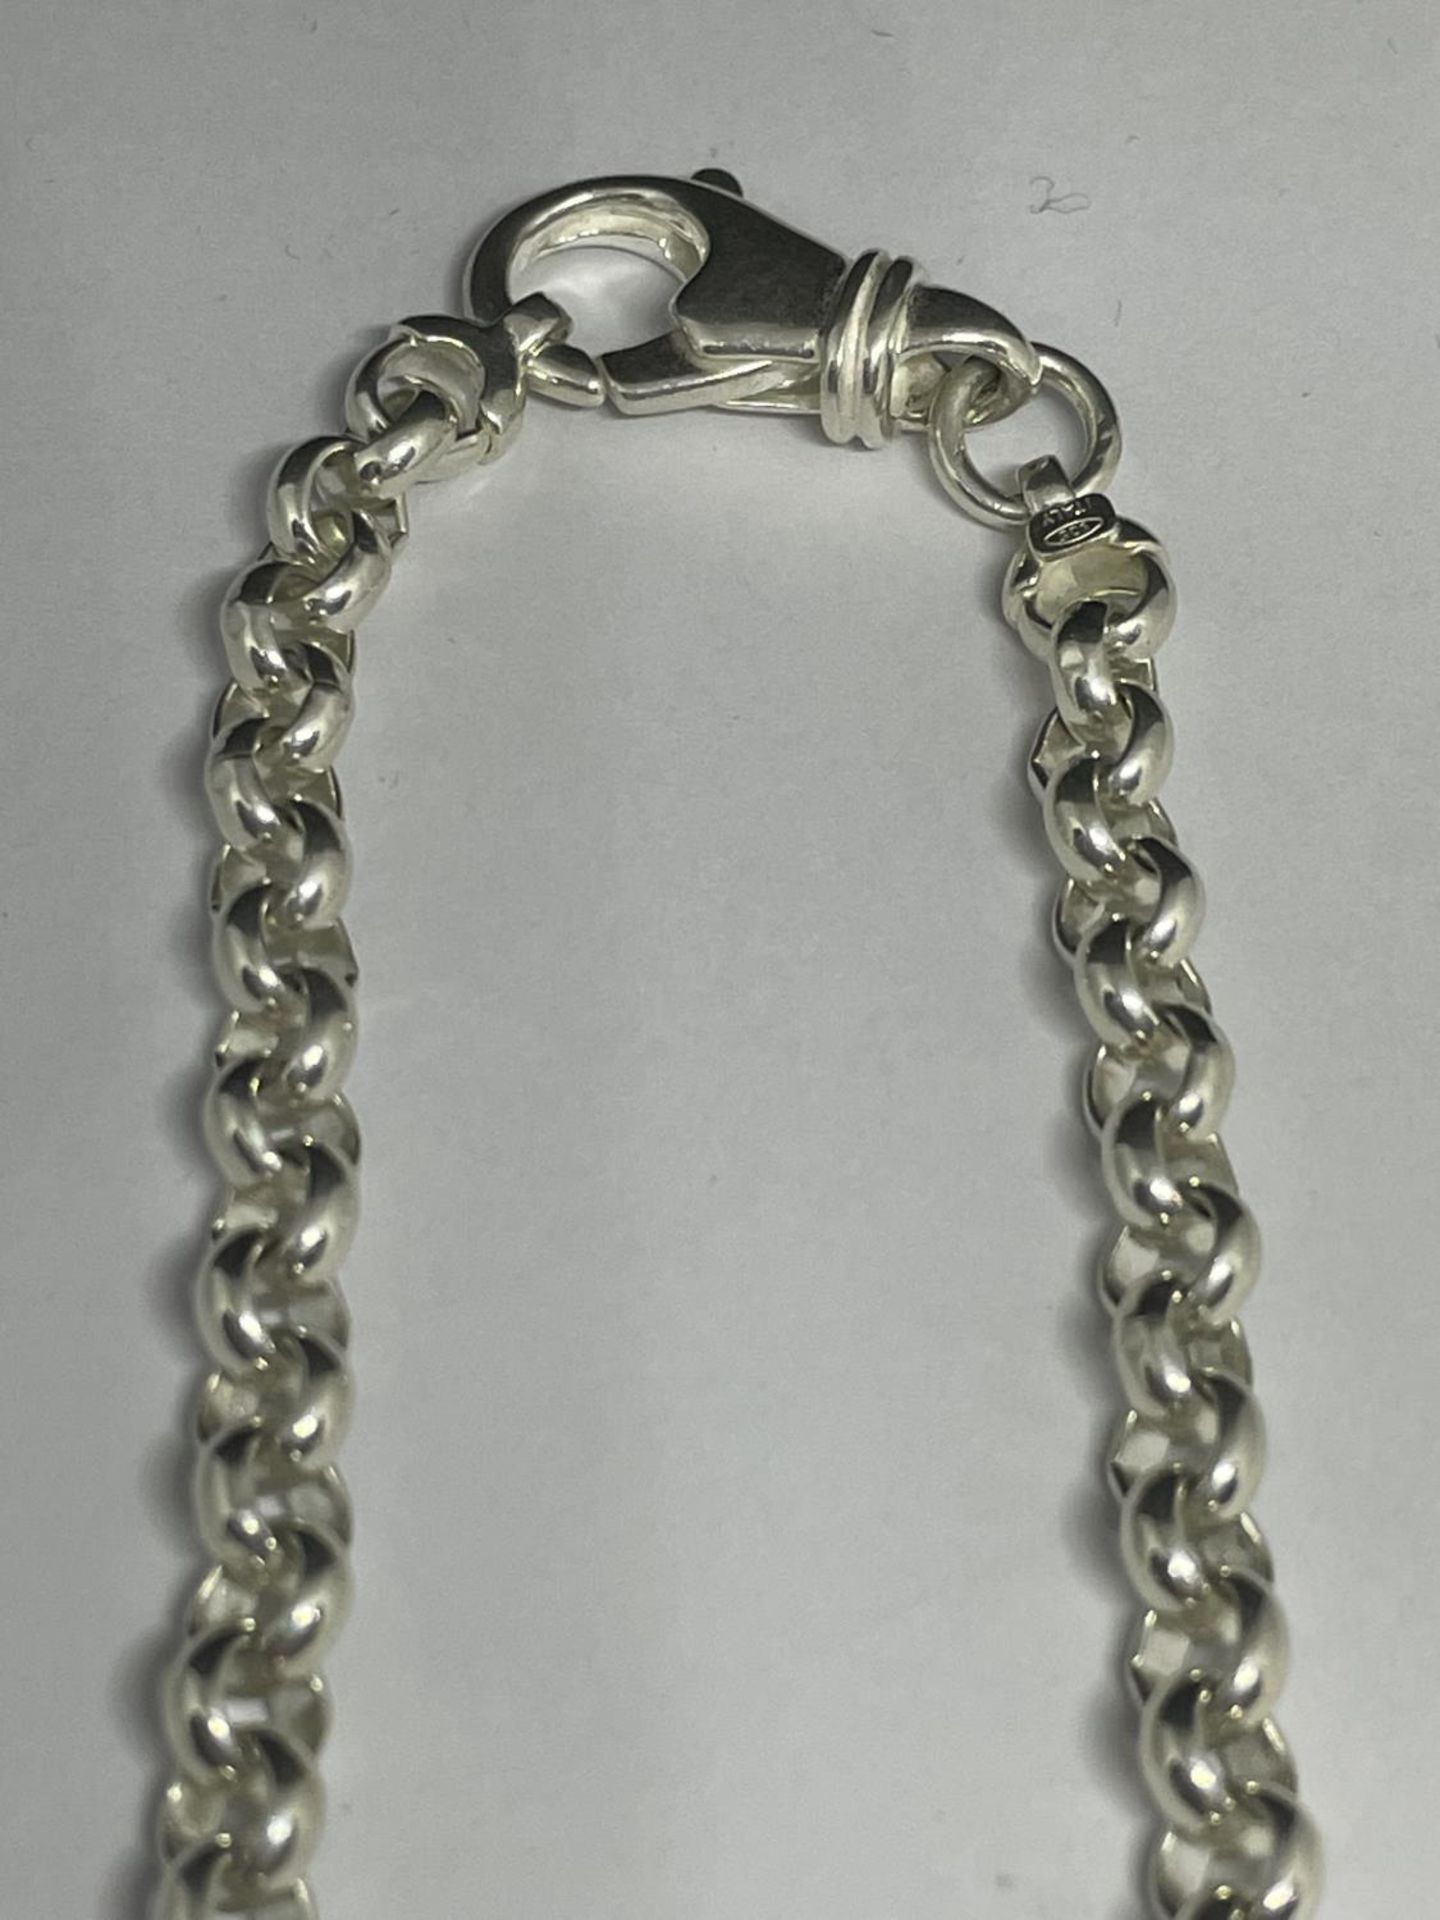 A HEAVY MARKED SILVER BELCHER CHAIN NECKLACE LENGTH 20 INCHES - Image 3 of 3